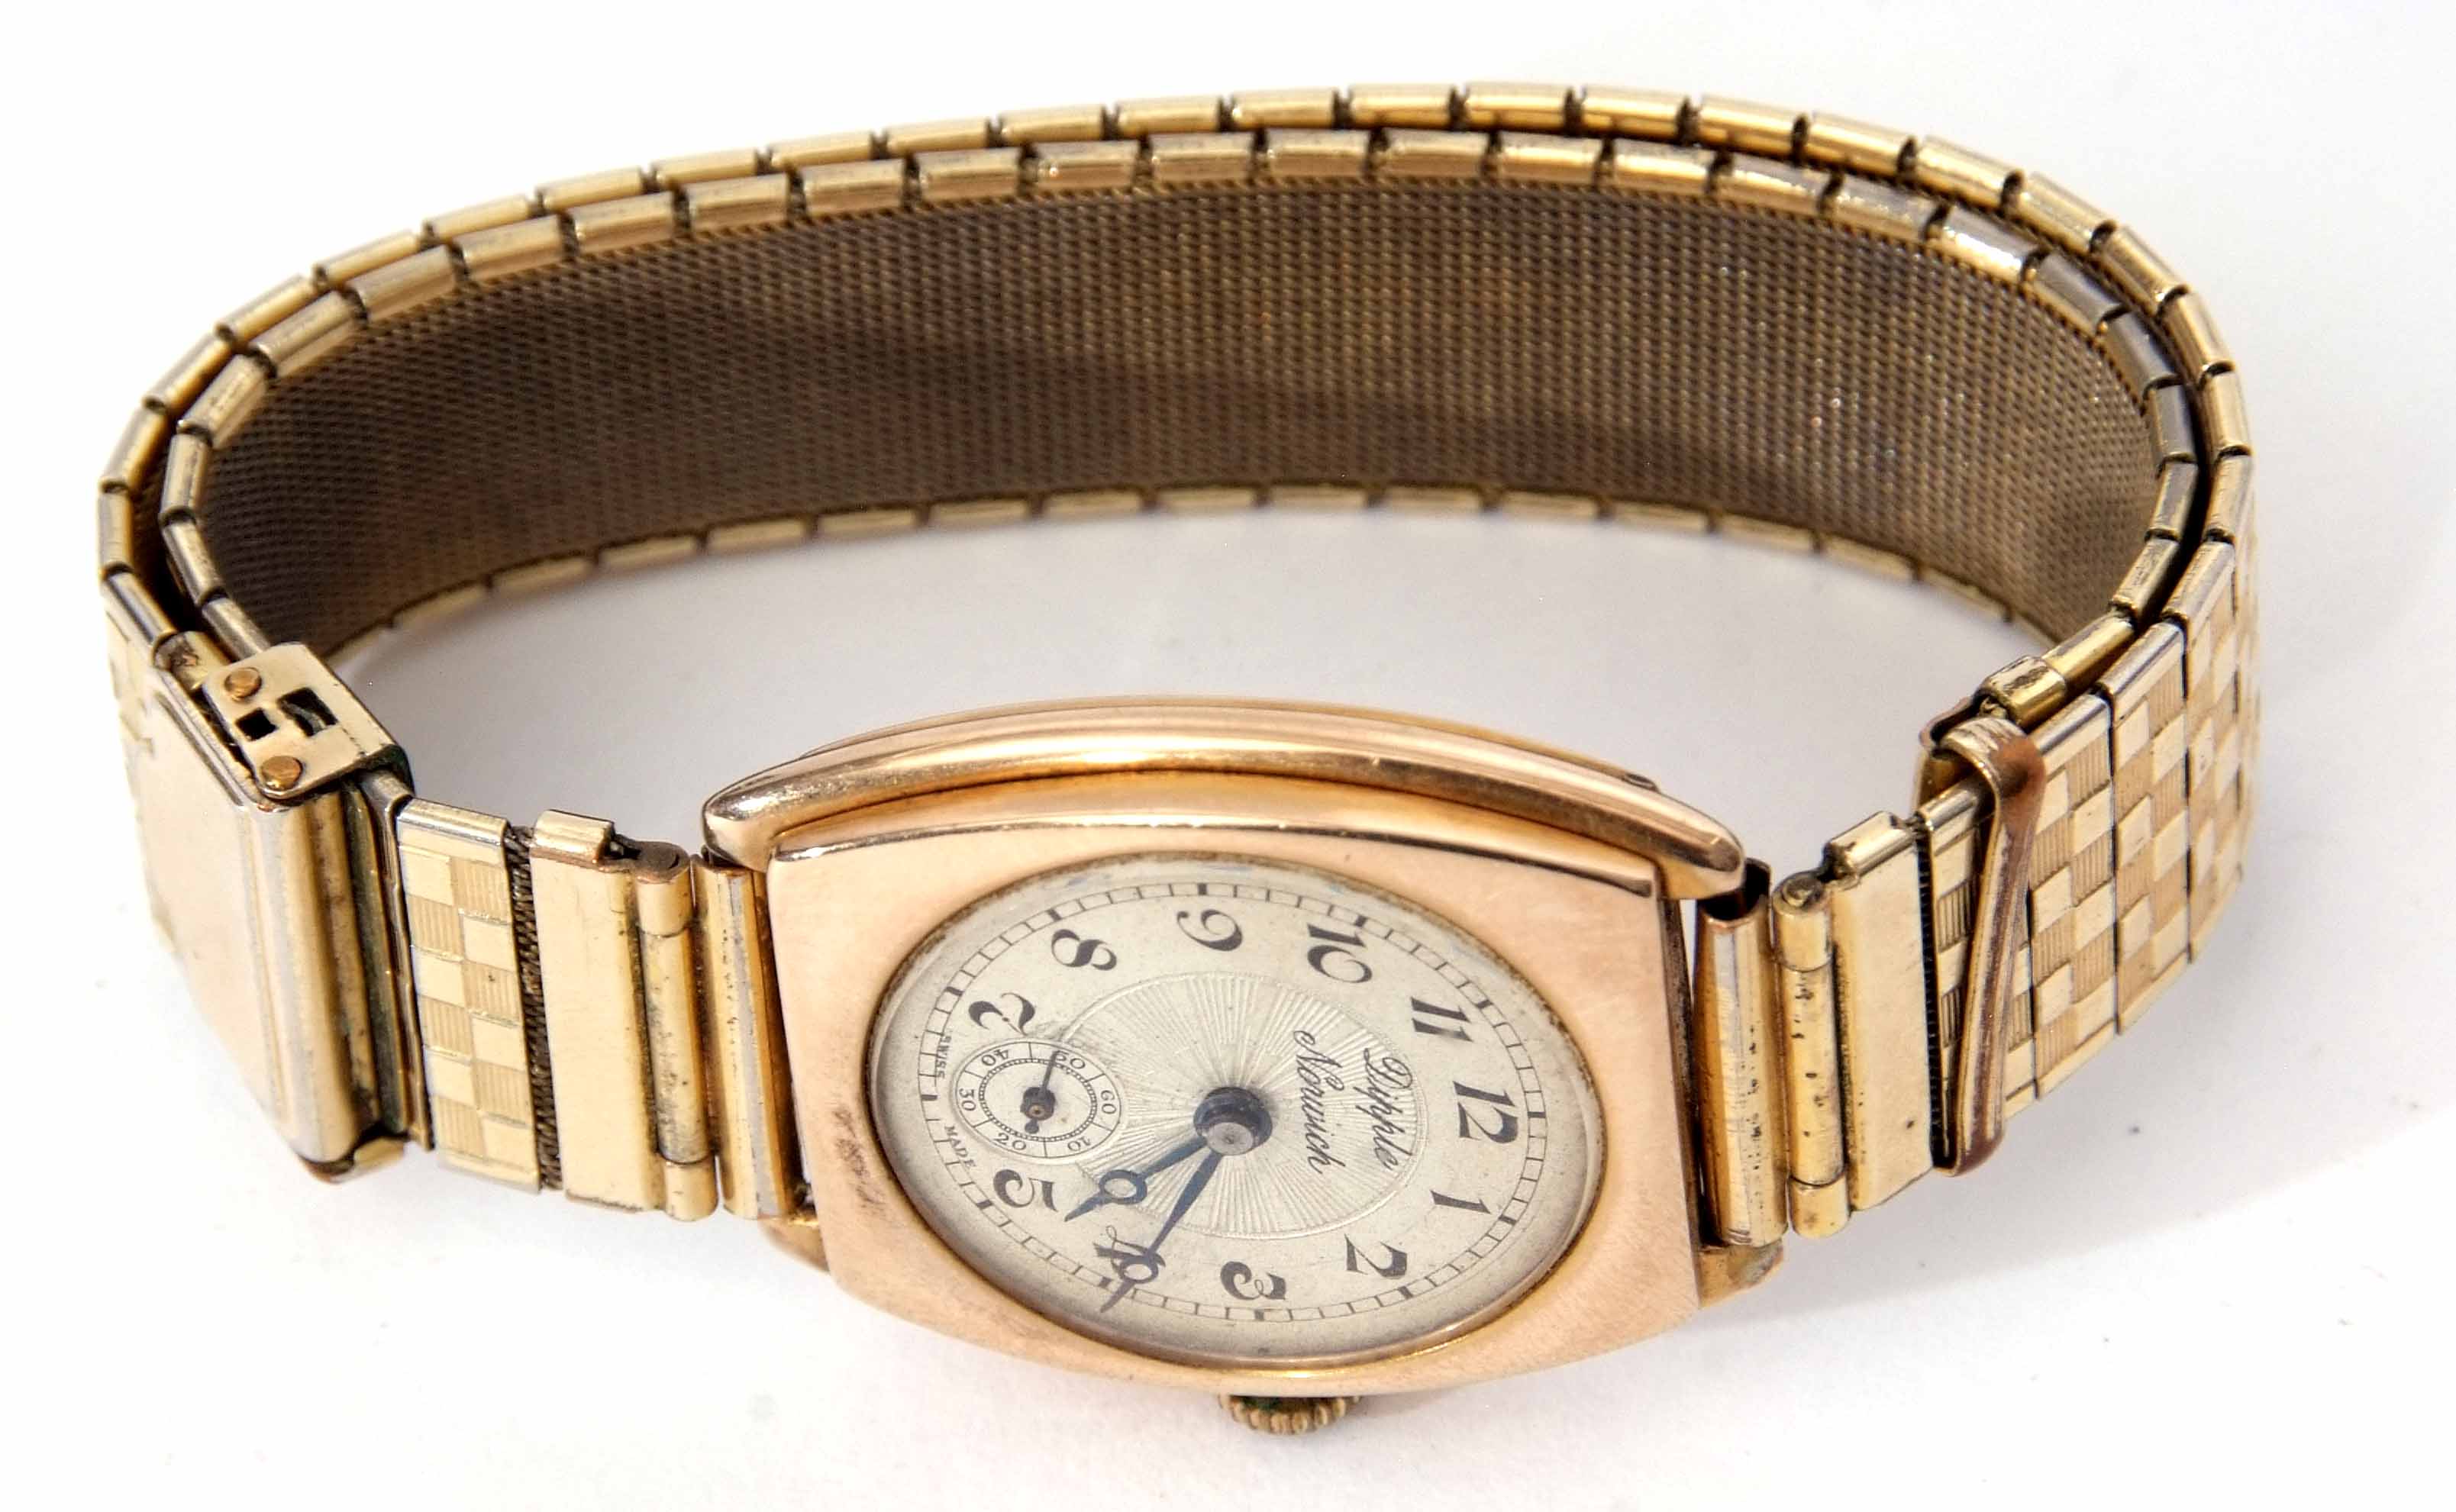 Second quarter of 20th century 9ct gold wrist watch retailed by Dipple - Norwich, the Swiss jewelled - Image 2 of 2